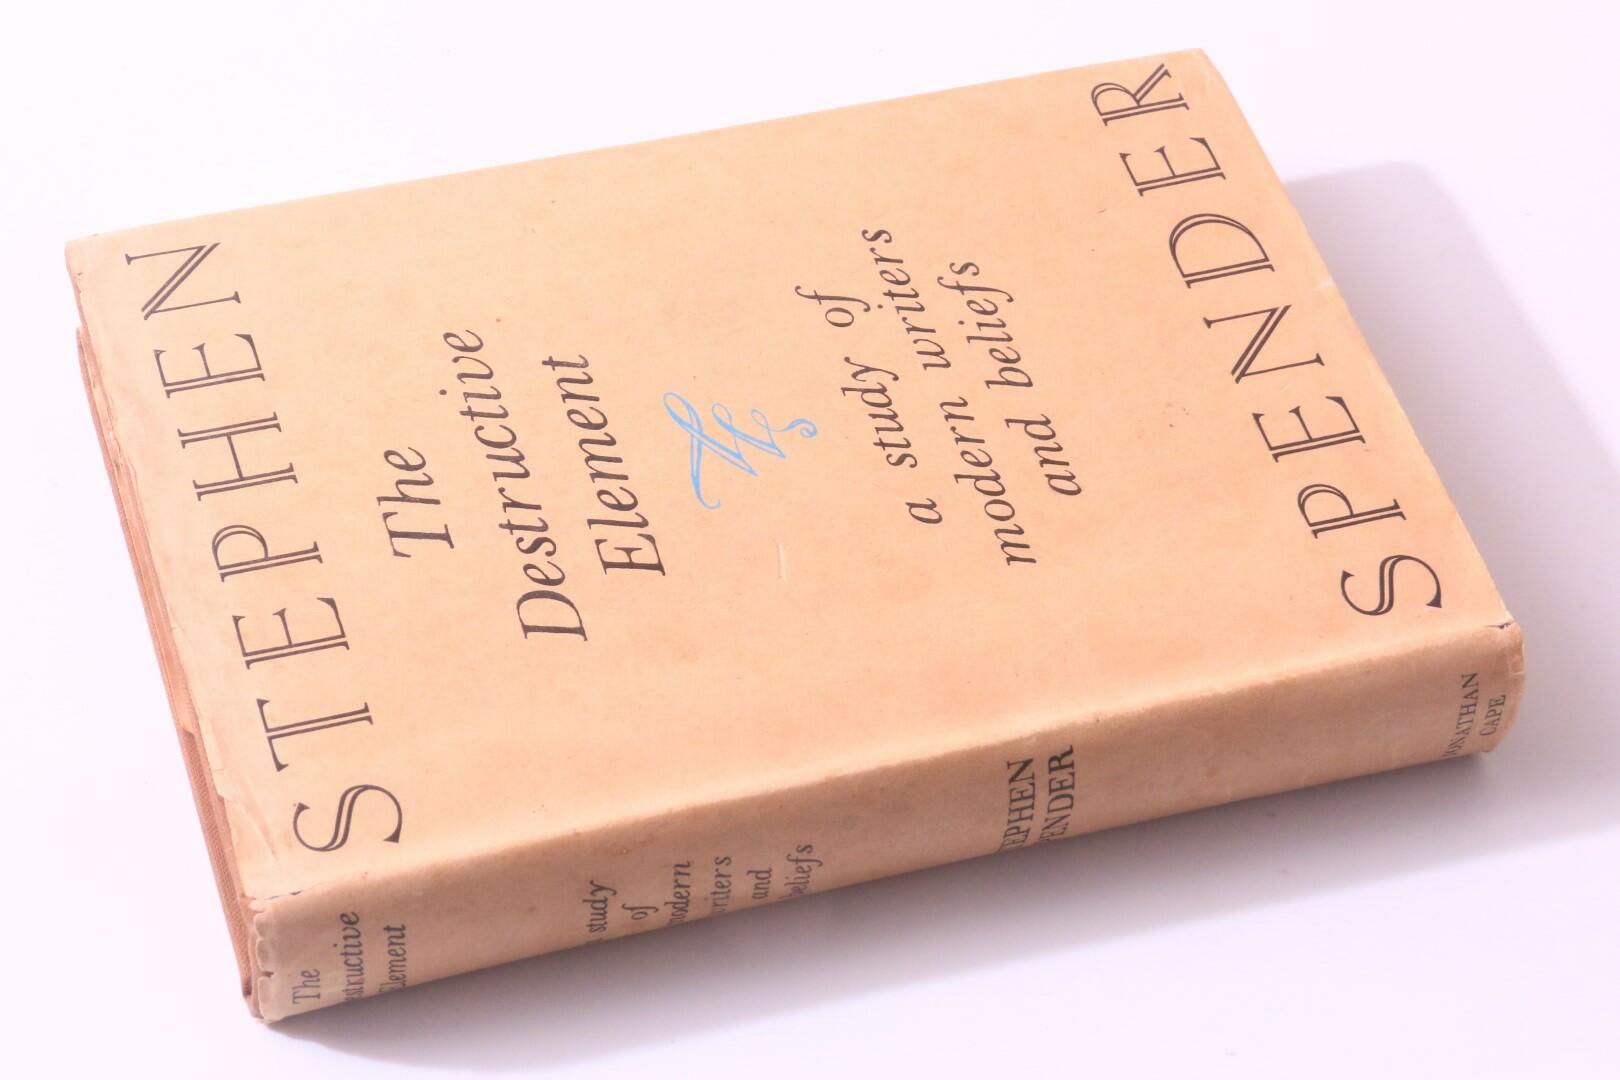 Stephen Spender - The Desctructive Element: A Study of Modern Writers and Beliefs - Jonathan Cape, 1935, First Edition.